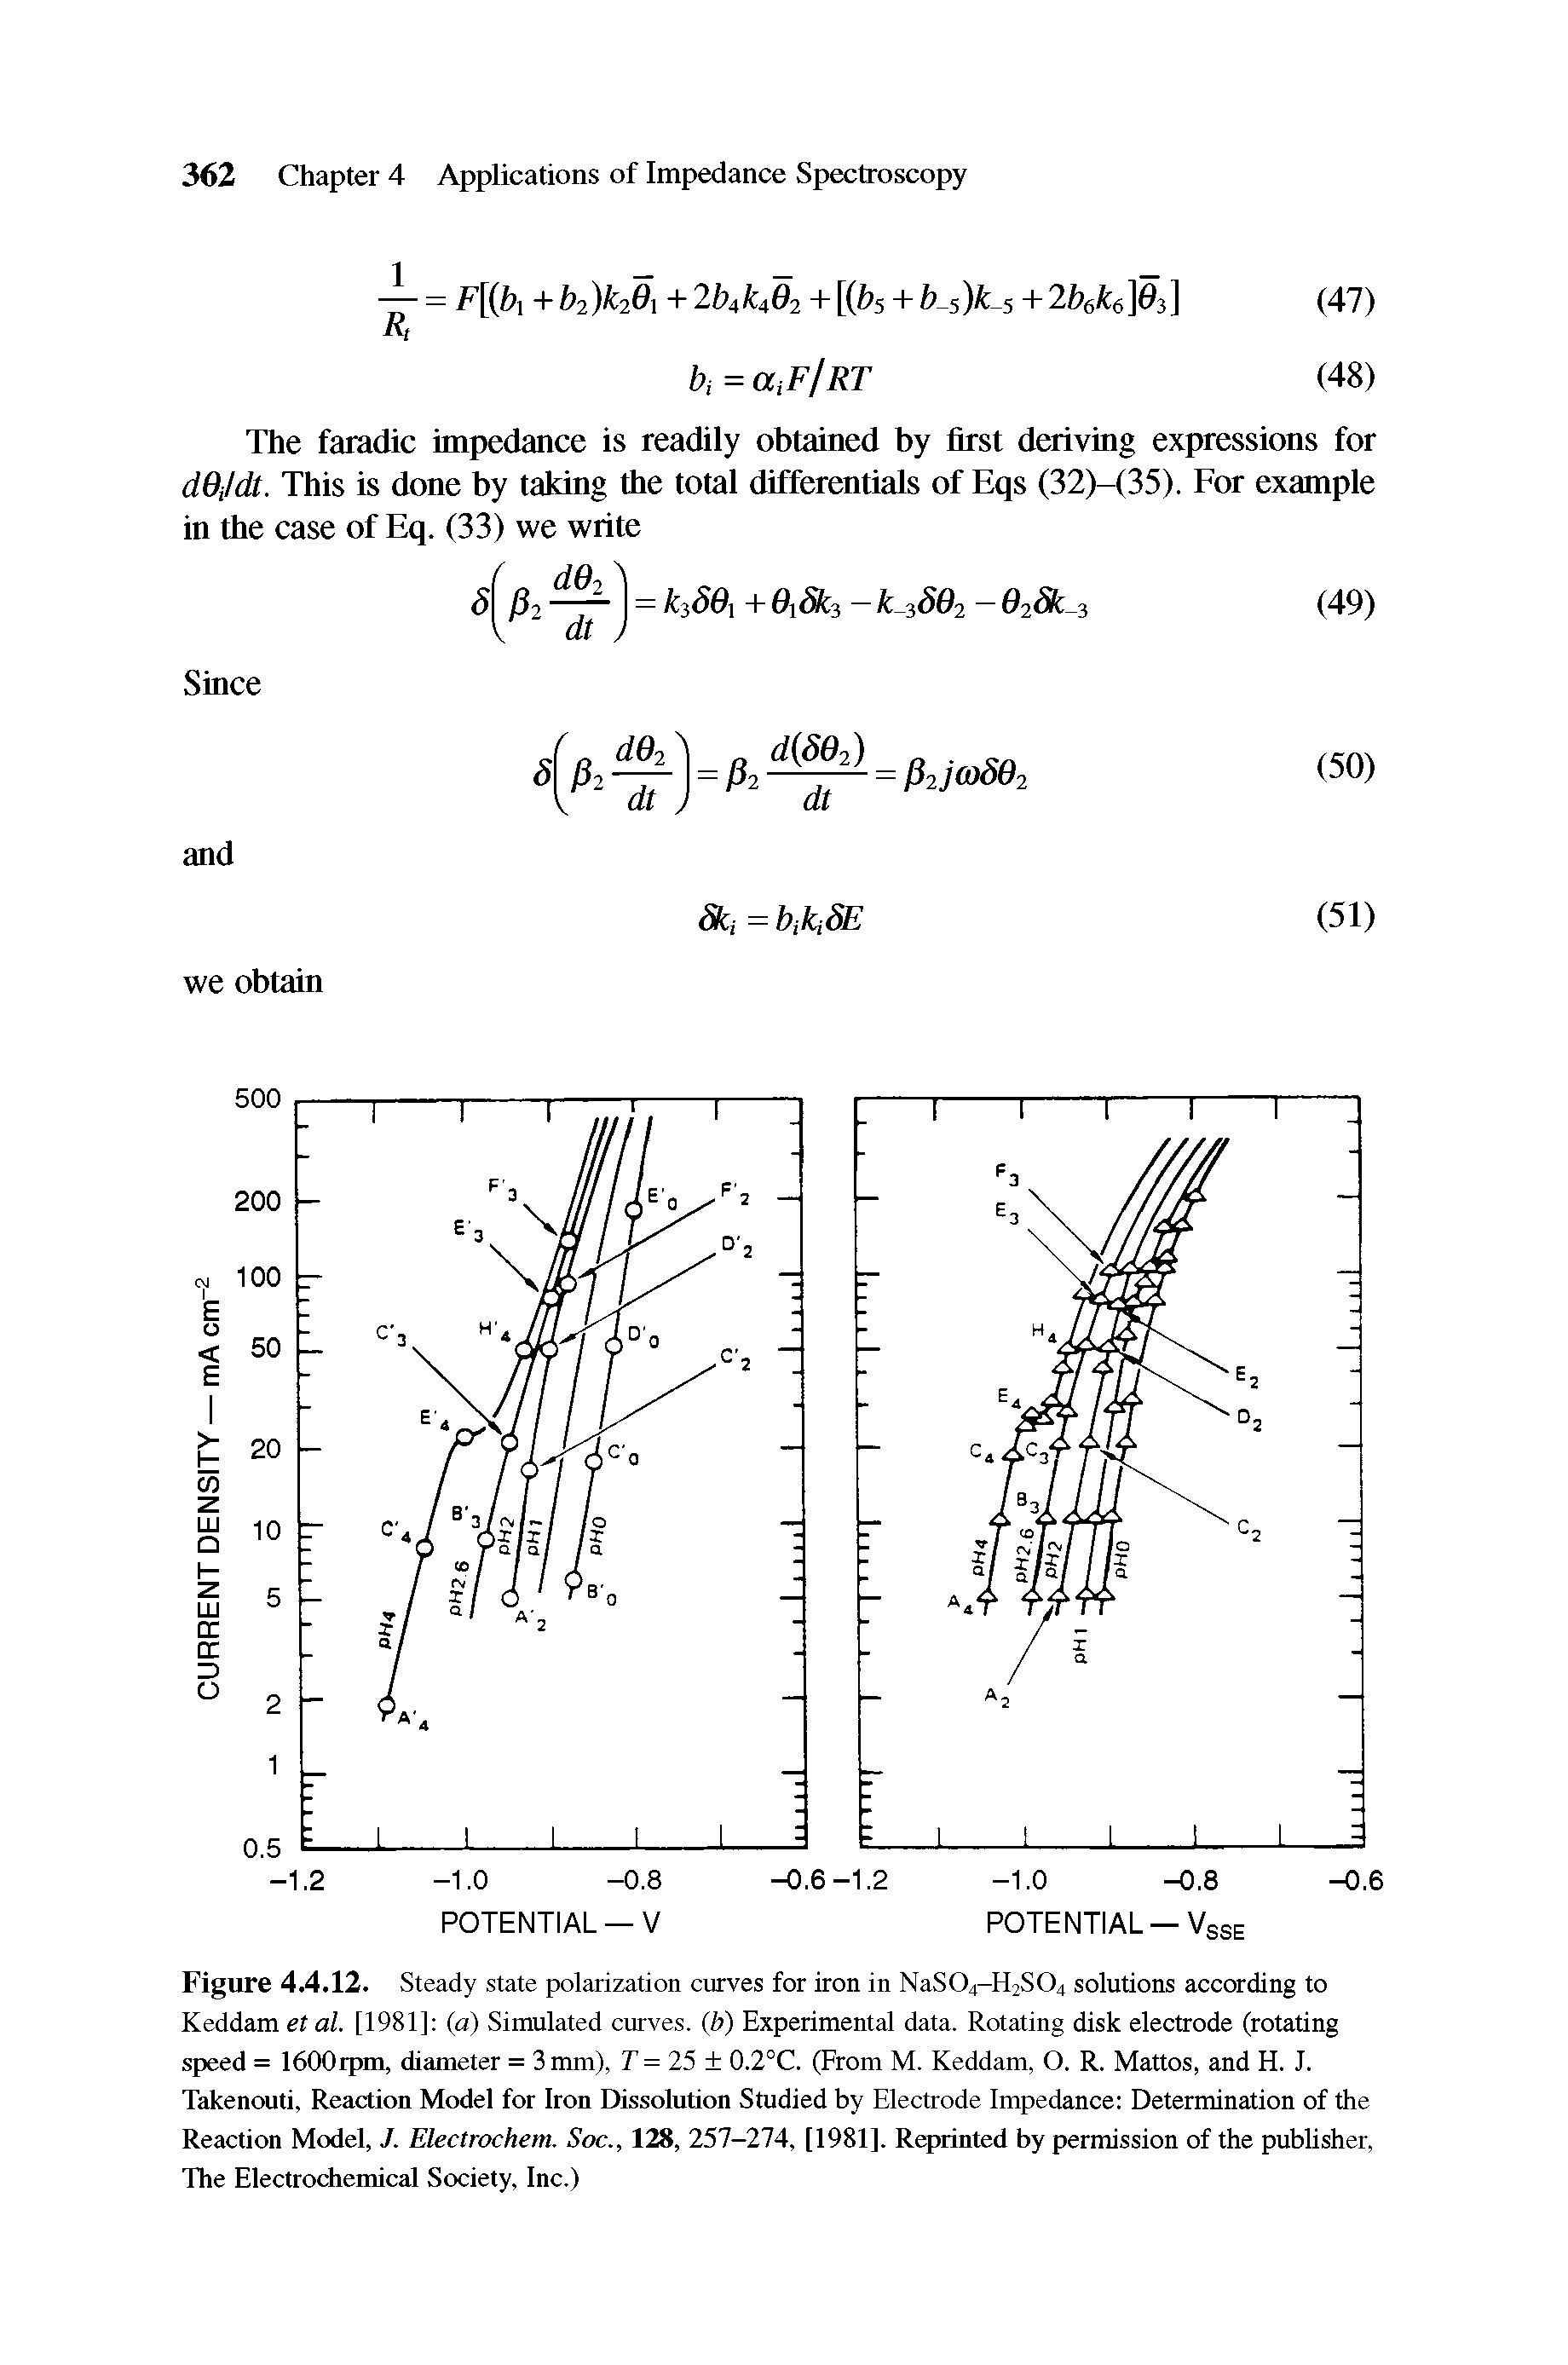 Figure 4.4.12. Steady state polarization curves for iron in NaS04-H2S04 solutions according to Keddam et al. [1981] (a) Simulated curves, b) Experimental data. Rotating disk electrode (rotating speed = 1600rpm, diameter = 3 mm), T = 25 0.2°C. (From M. Keddam, O. R. Mattos, and H. J. Takenouti, Reaction Model for Iron Dissolution Studied by Electrode Impedance Determination of the Reaction Model, J. Electrochem. Soc., 128, 257-274, [1981]. Reprinted by permission of the publisher. The Electrochemical Society, Inc.)...